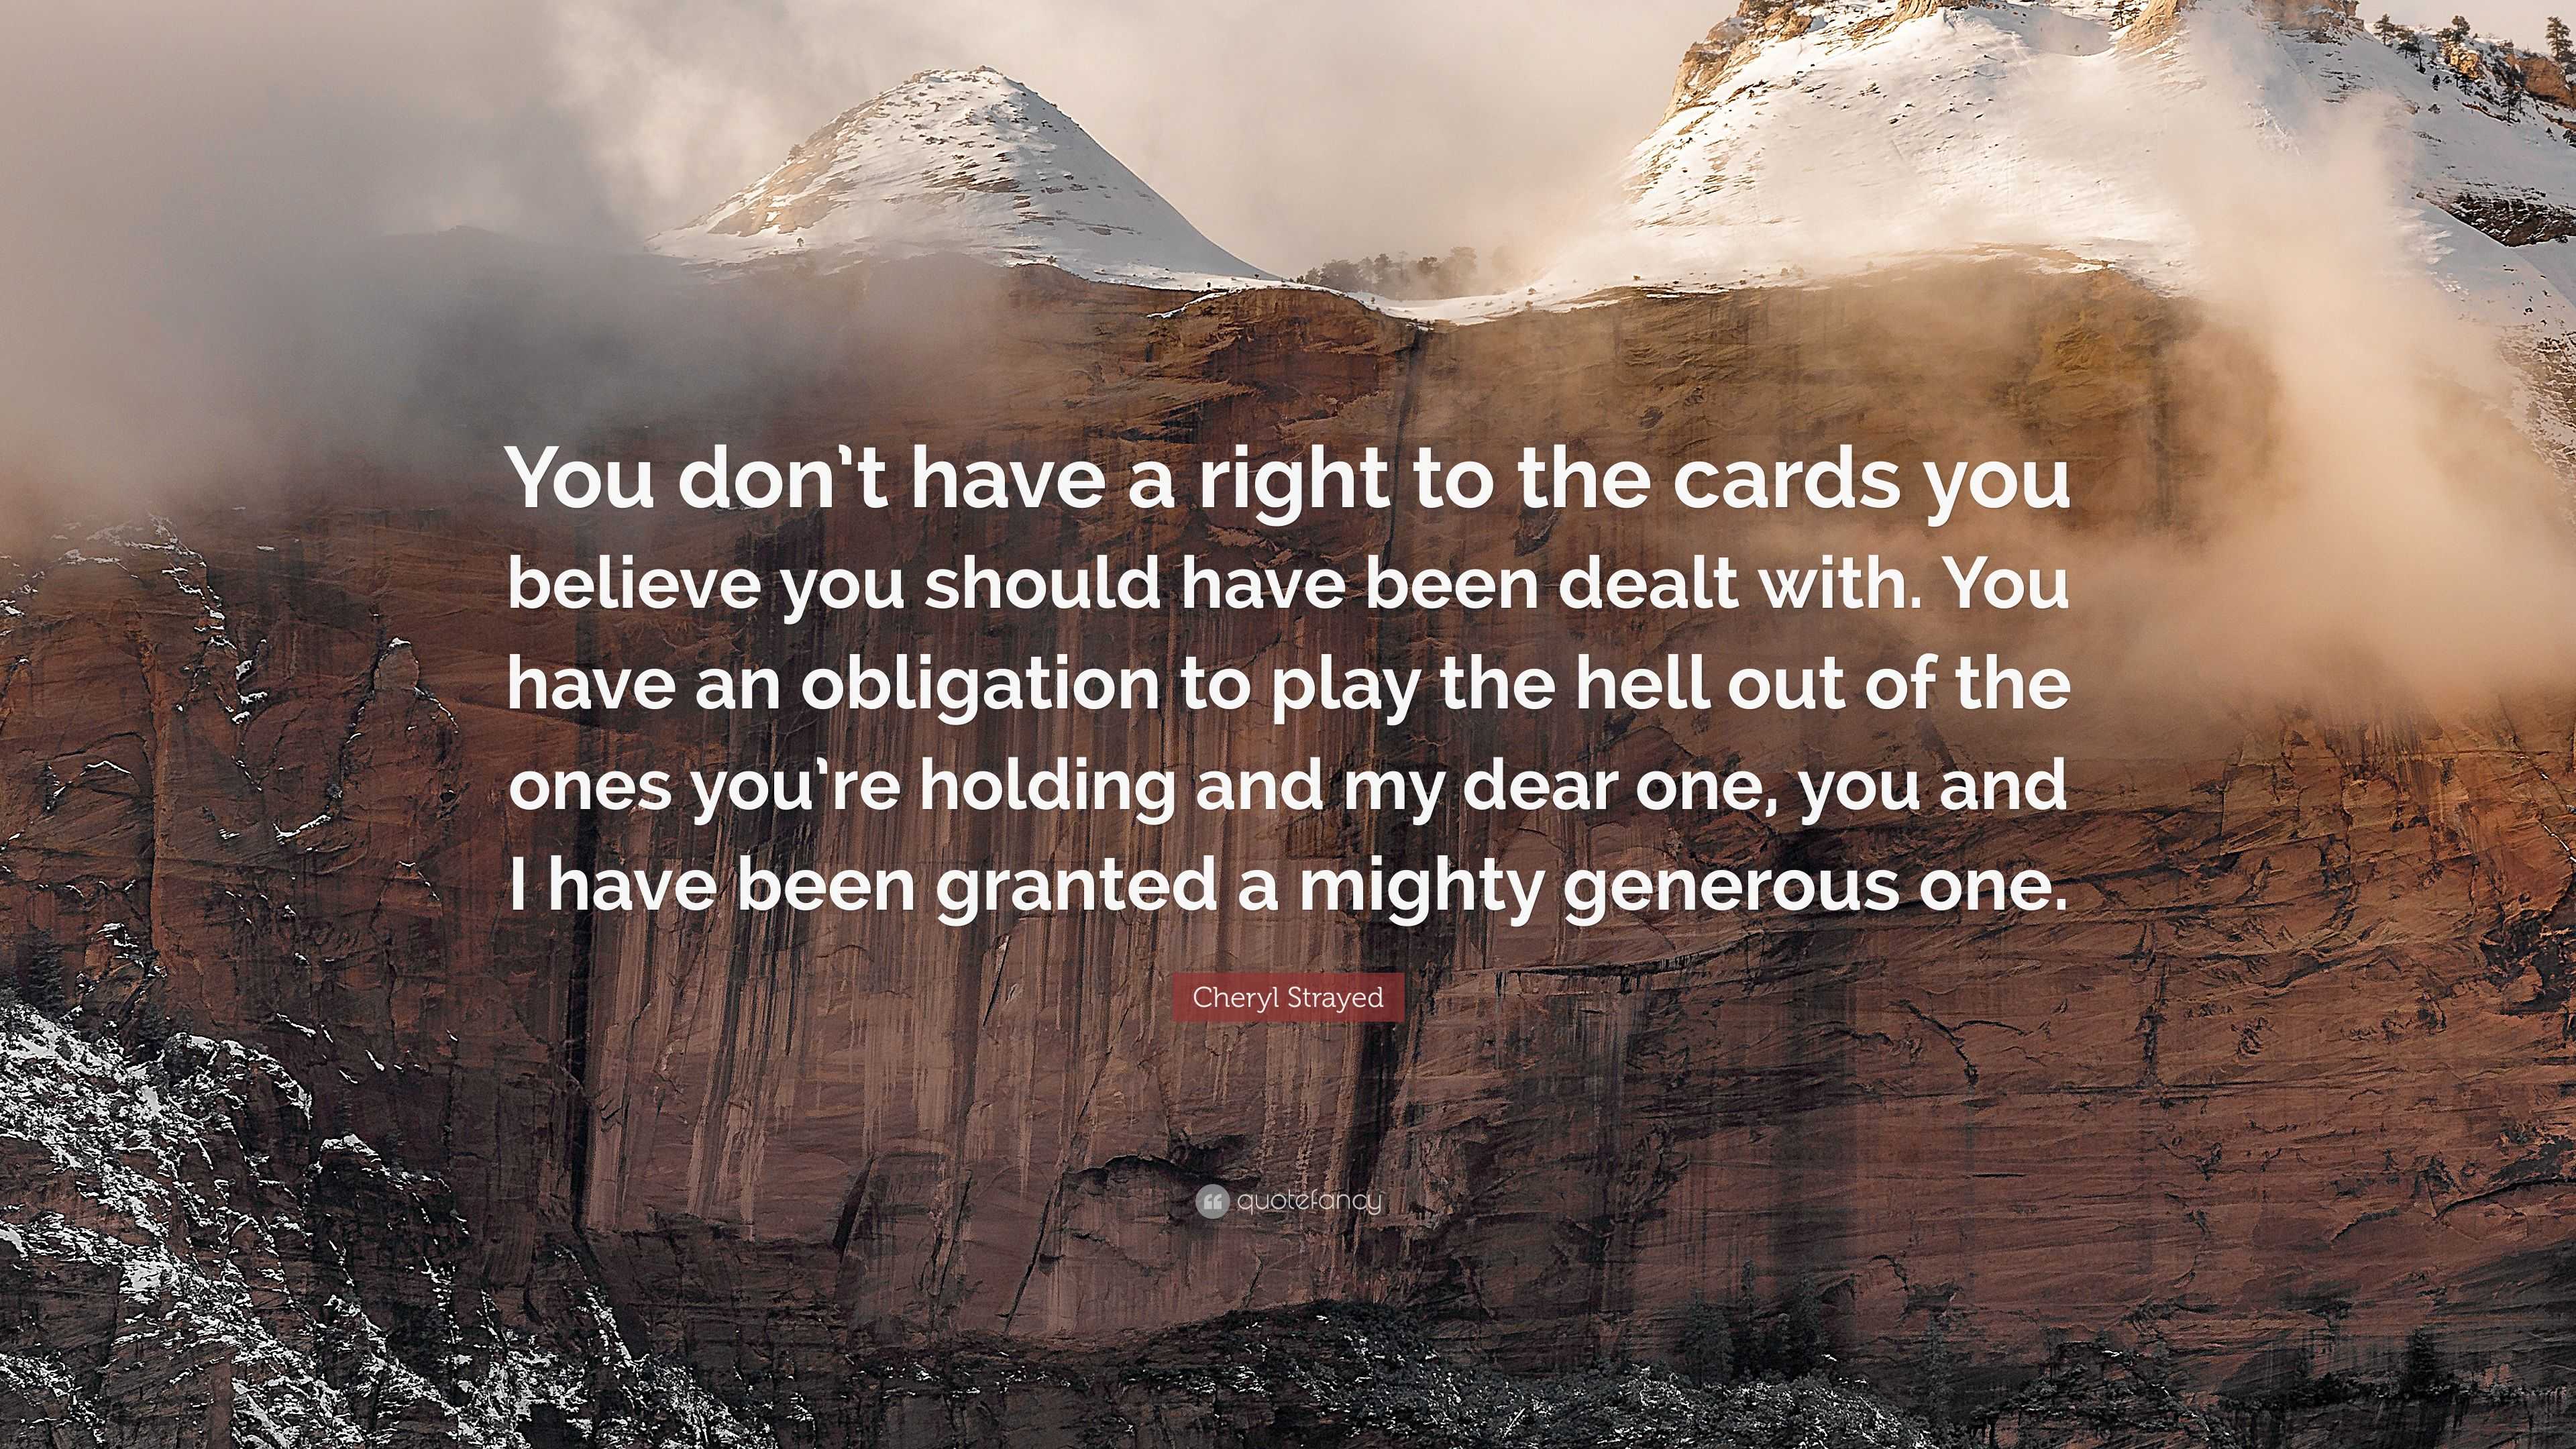 Cheryl Strayed Quote “You don t have a right to the cards you